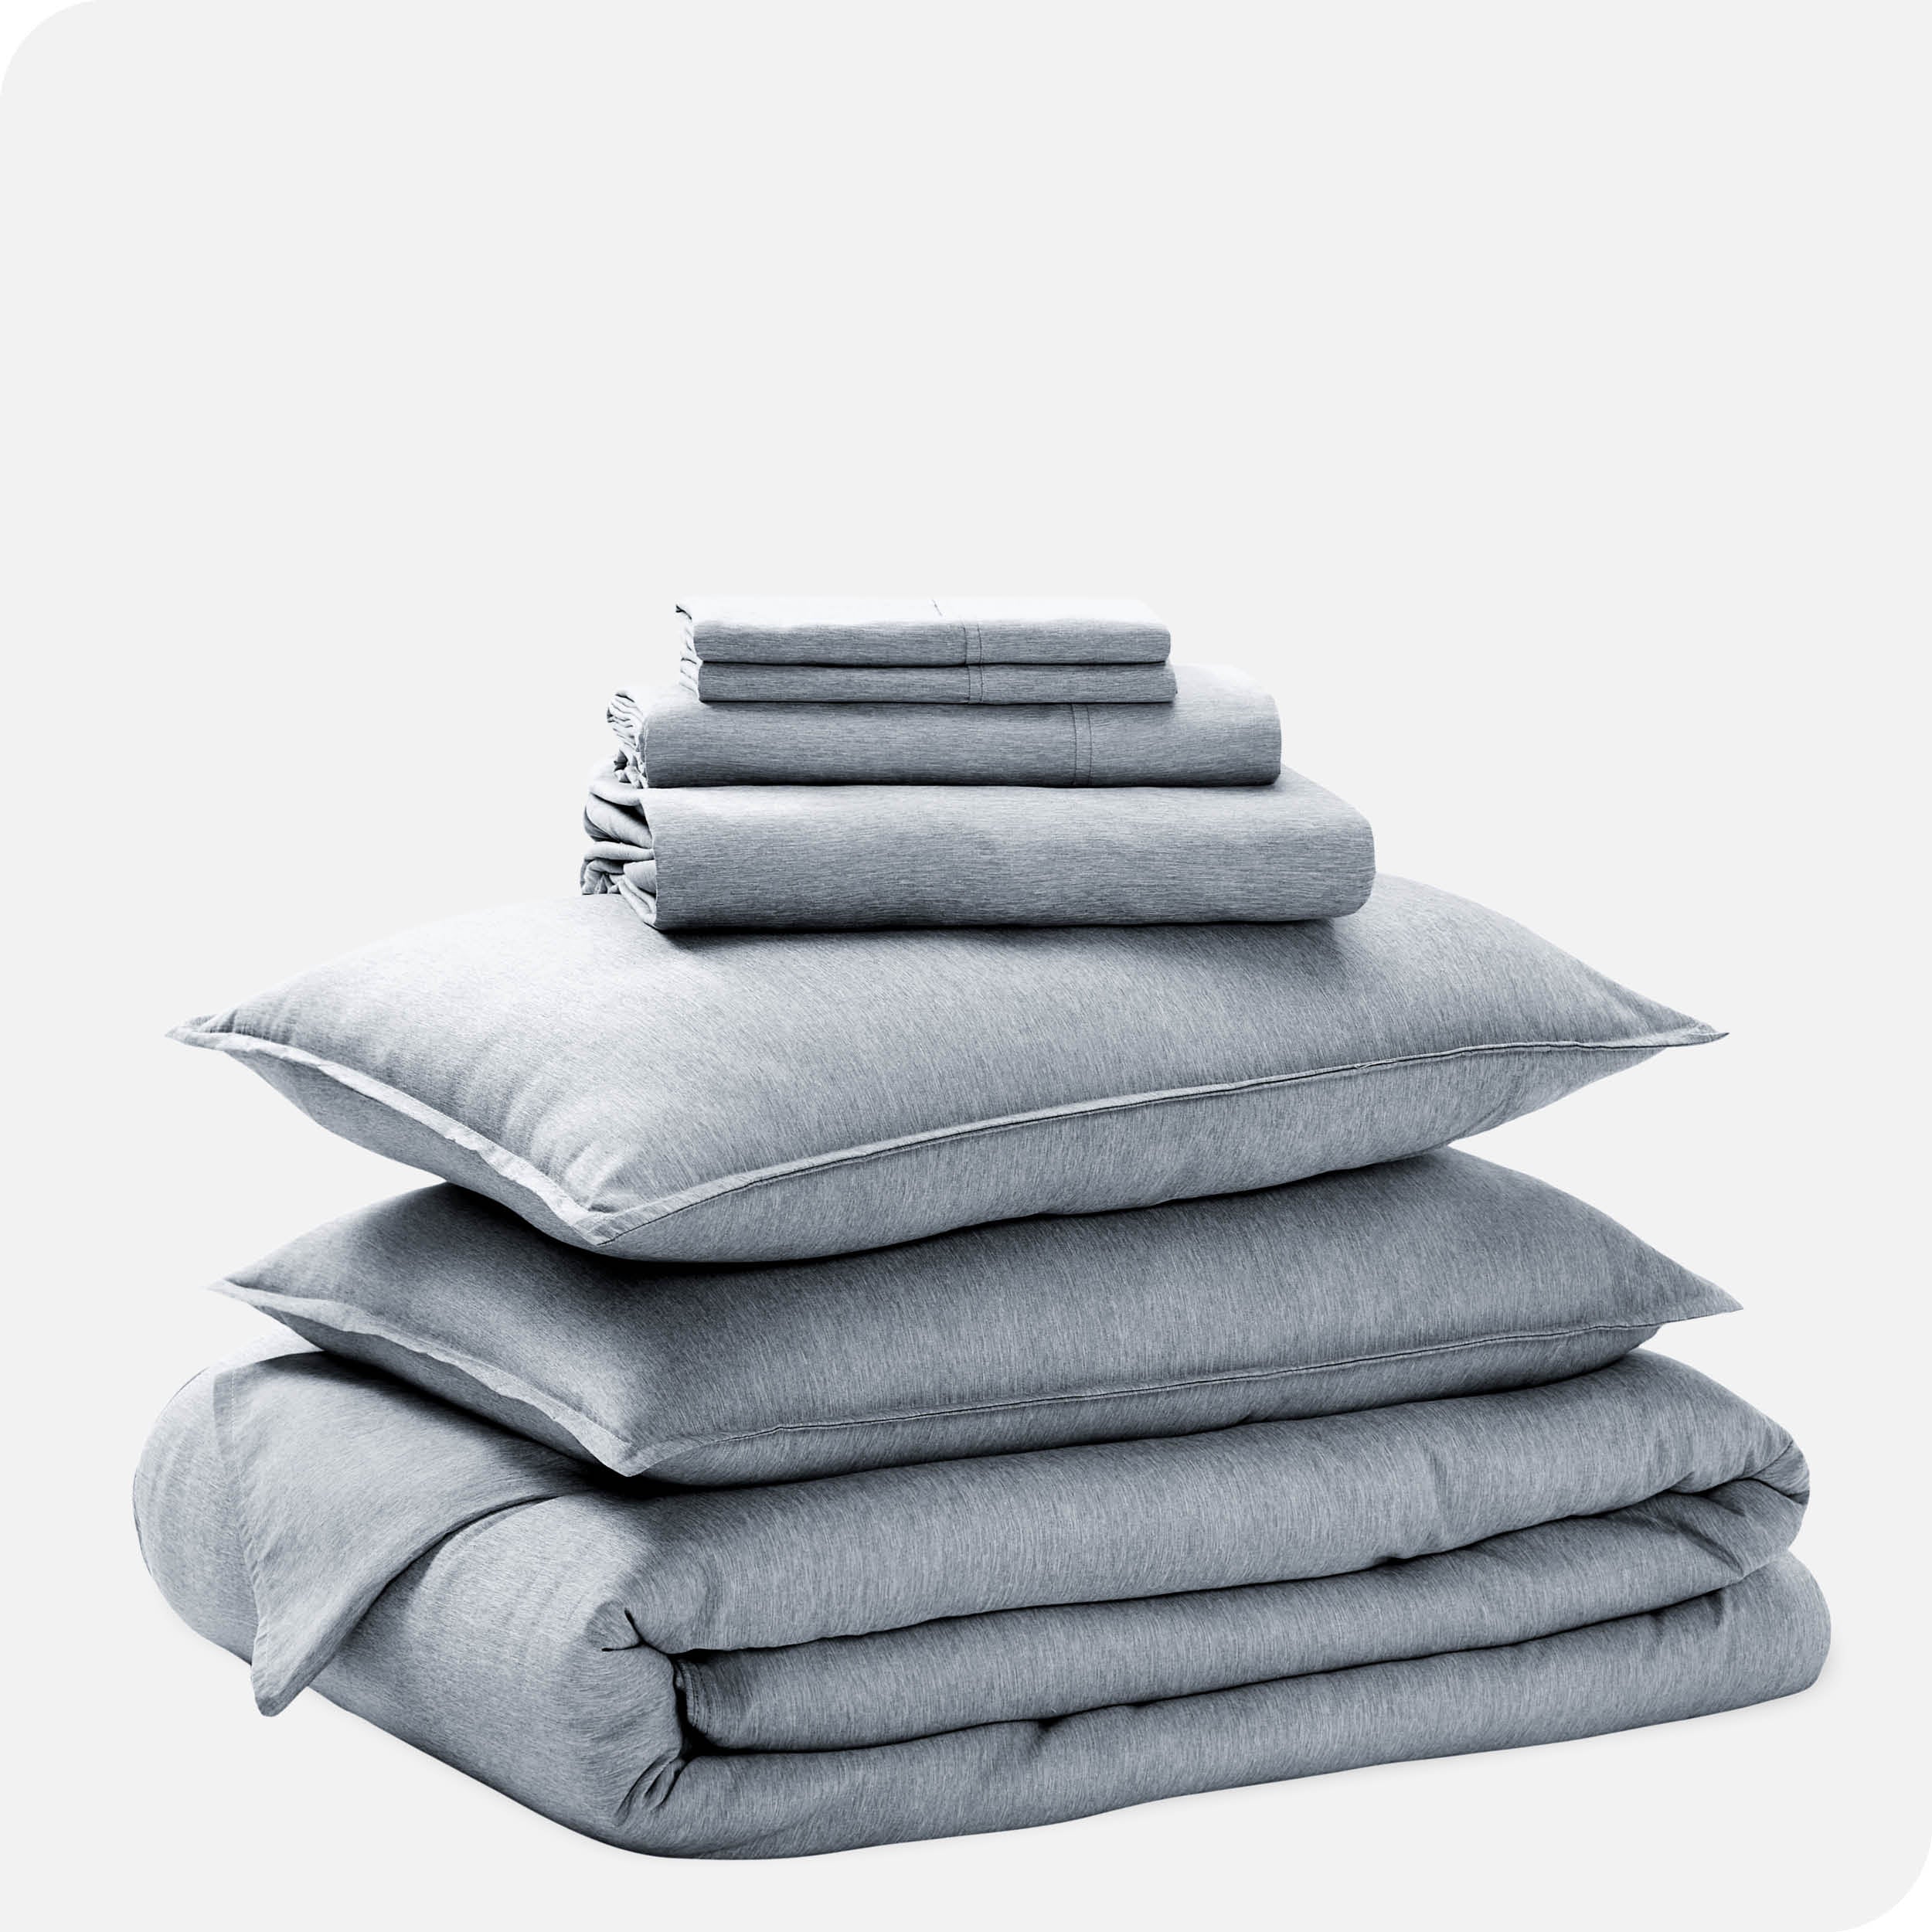 A heathered bedding set folded and stacked.